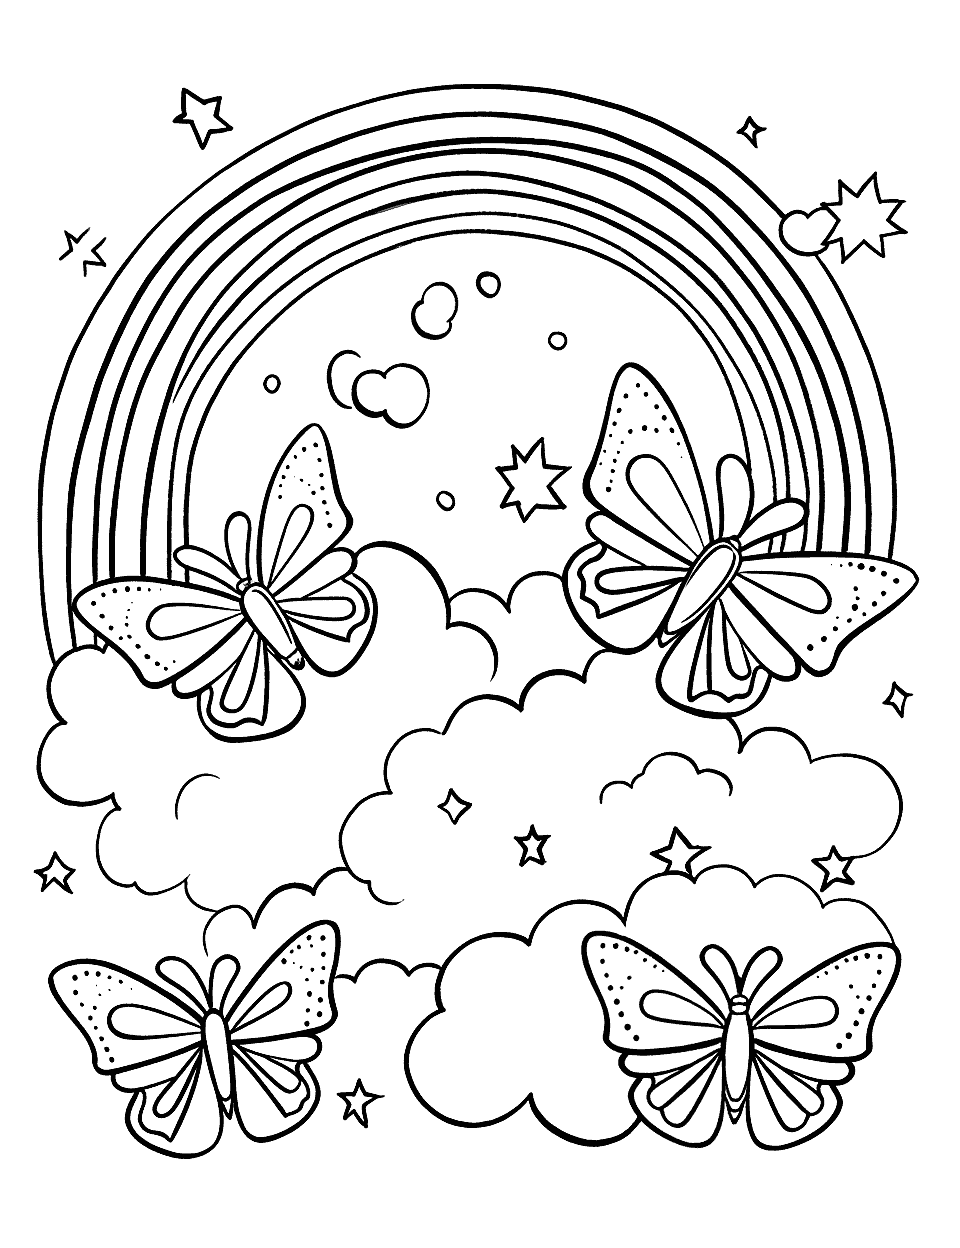 Butterflies and Rainbow Coloring Page - Detailed coloring sheet with several butterflies fluttering around a rainbow.